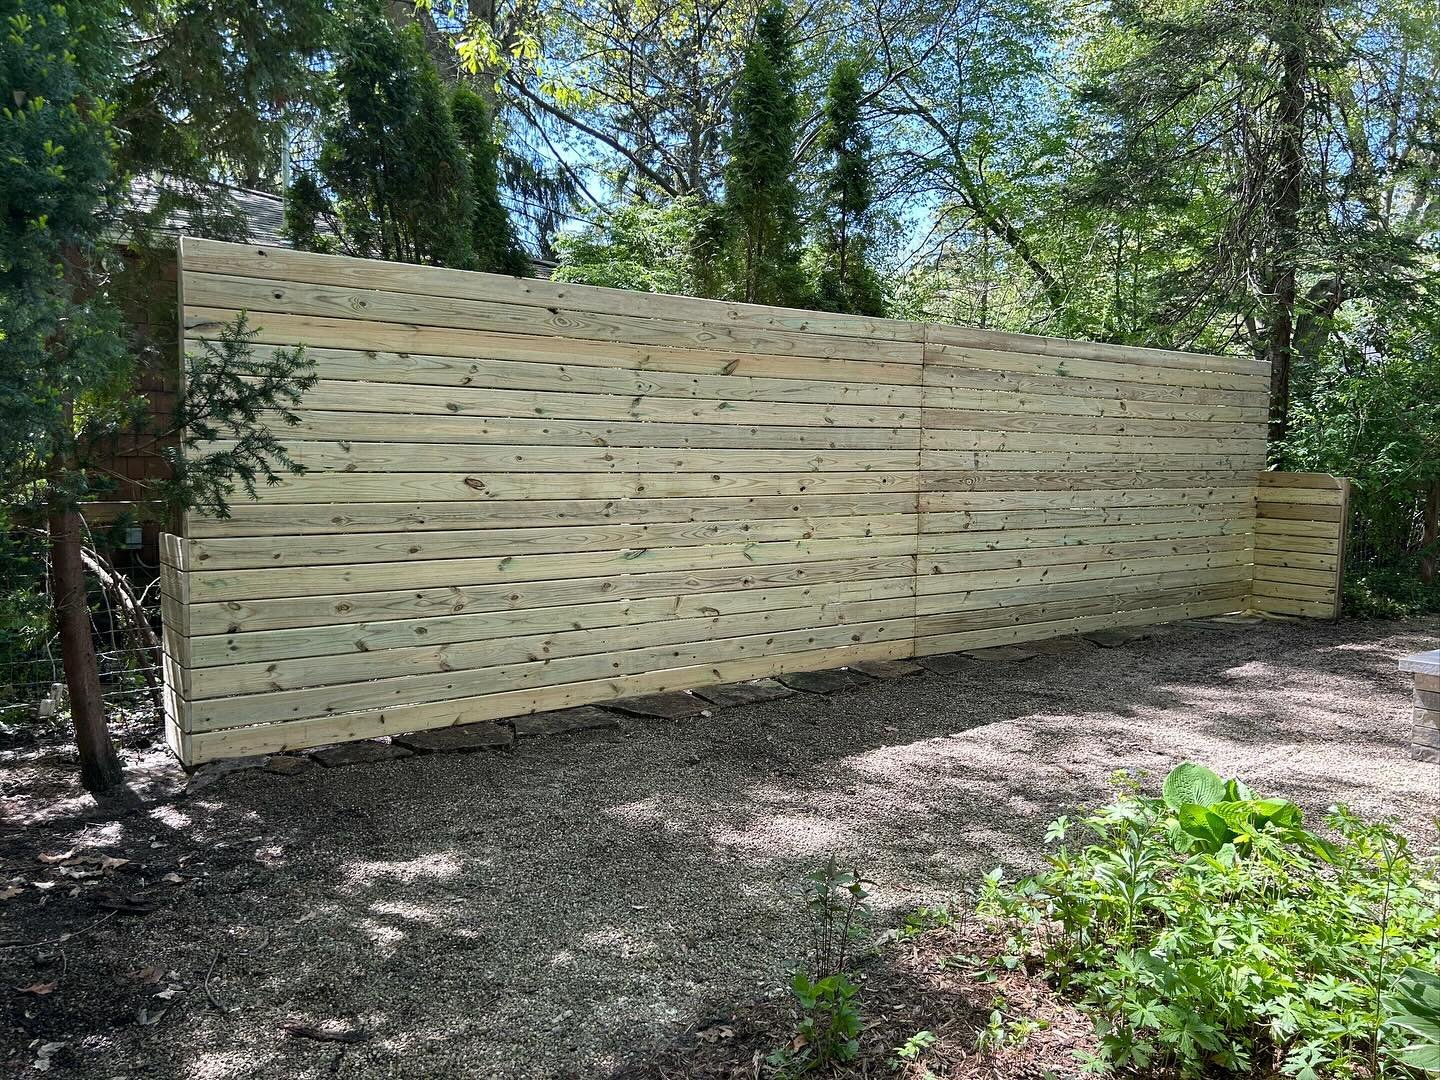 Traveled to Union Pier, MI to help a client out with this modern privacy fence.  There was an older Lattice style structure before (see pic 4 and 5 (taking it down)) and it was overgrown with vines and rotted out in many places.  Thanks to @andrew_ad